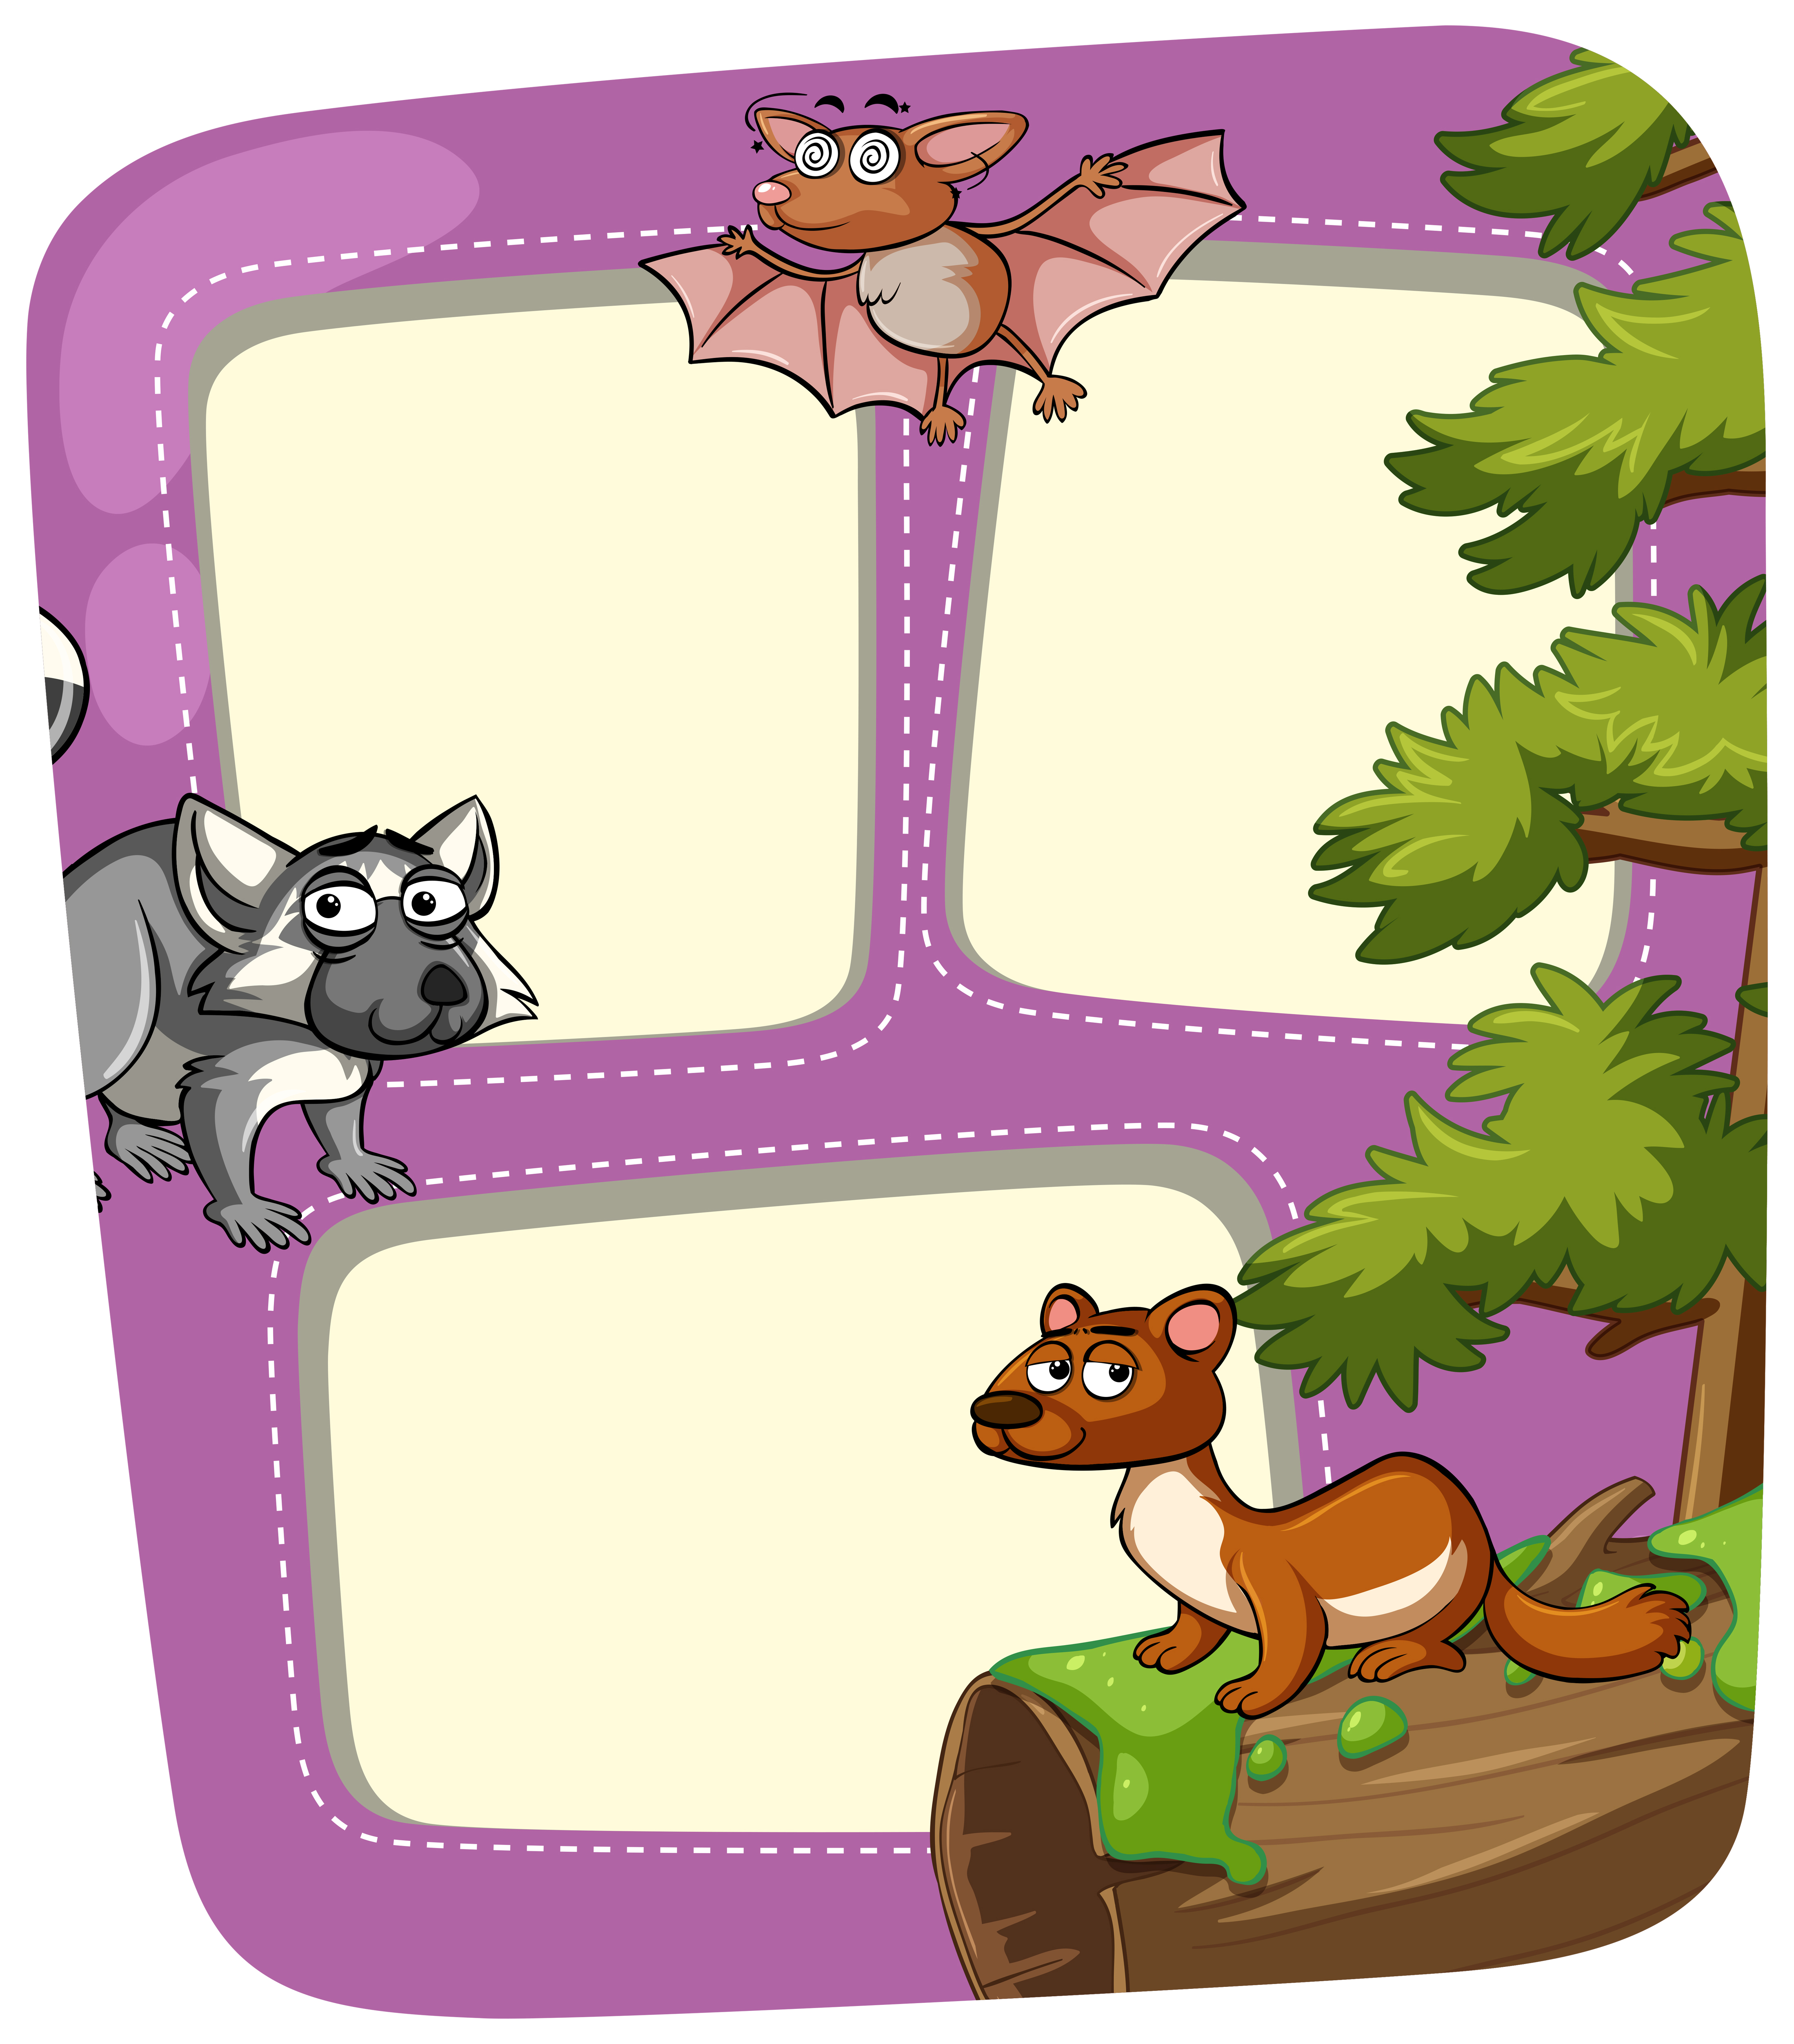 Download Border template with wild animals in forest - Download Free Vectors, Clipart Graphics & Vector Art